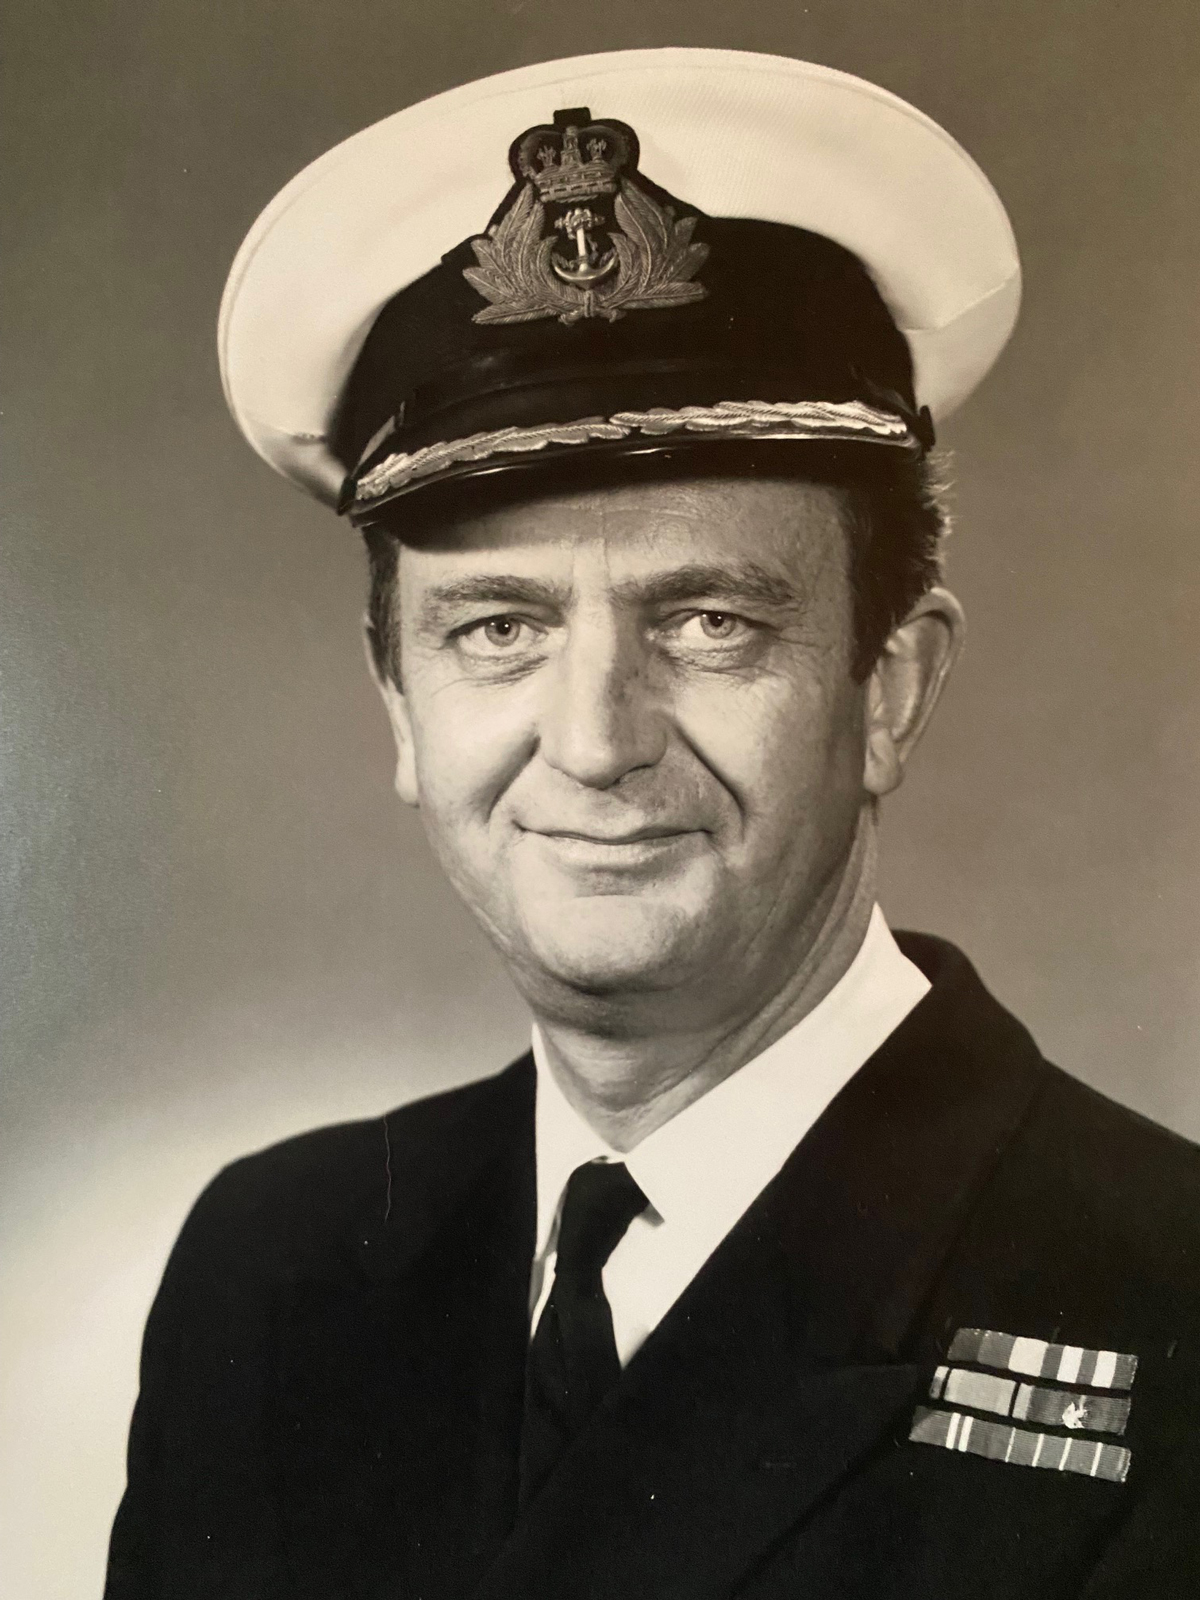 Capt(N) Peter Hinton, the inspiration for the Memorial Award for Leadership and Excellence in Service. Photo supplied.